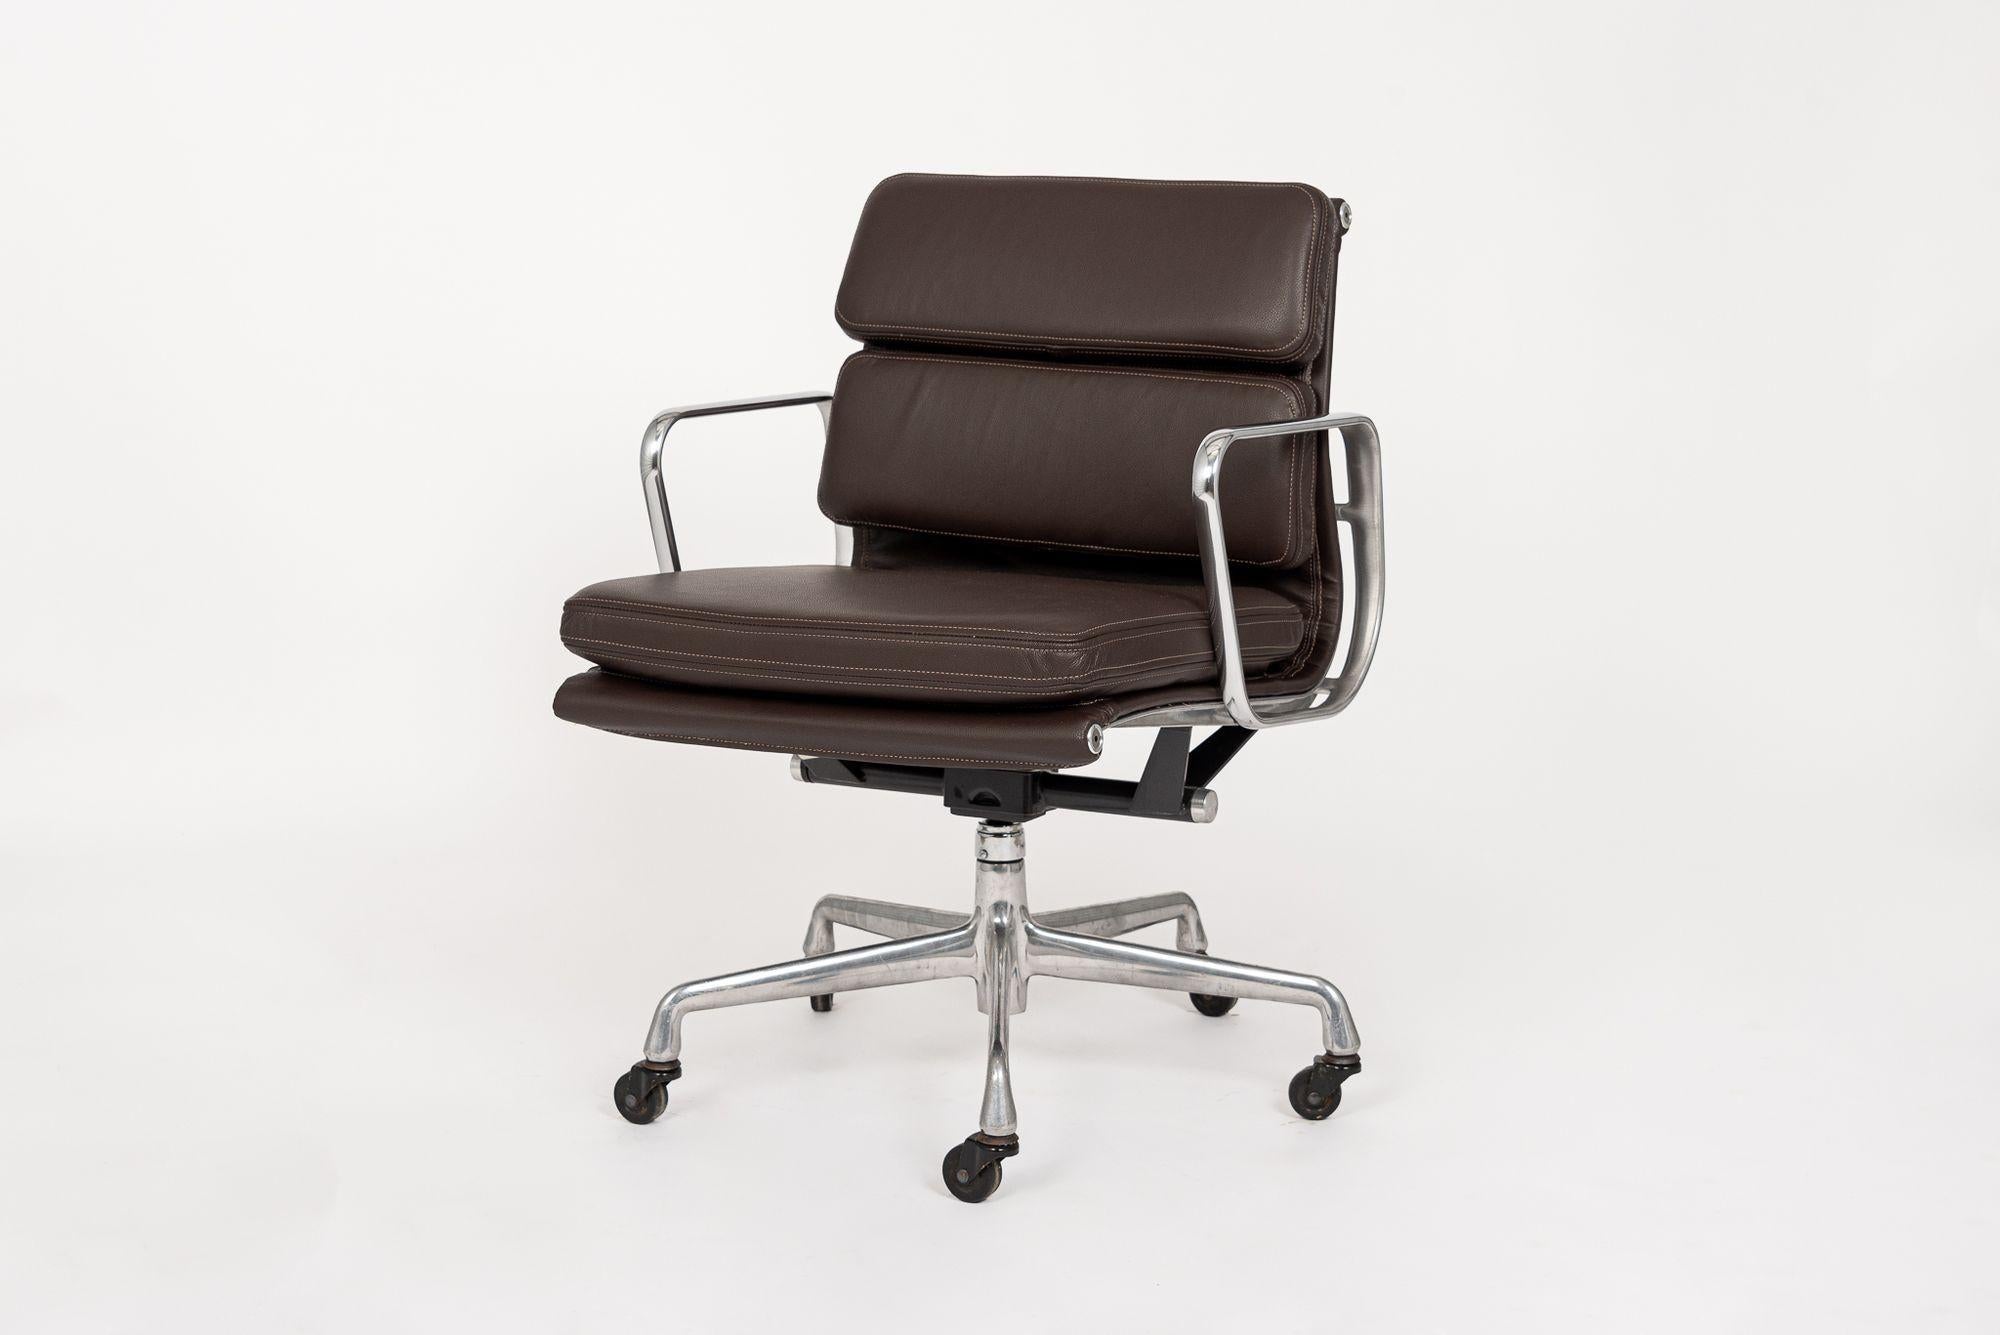 This original Eames for Herman Miller Soft Pad Management Height dark brown leather desk chair from the Aluminum Group Collection was manufactured in the 2000s. This iconic mid century modern office chair was first introduced in 1969 by Charles and